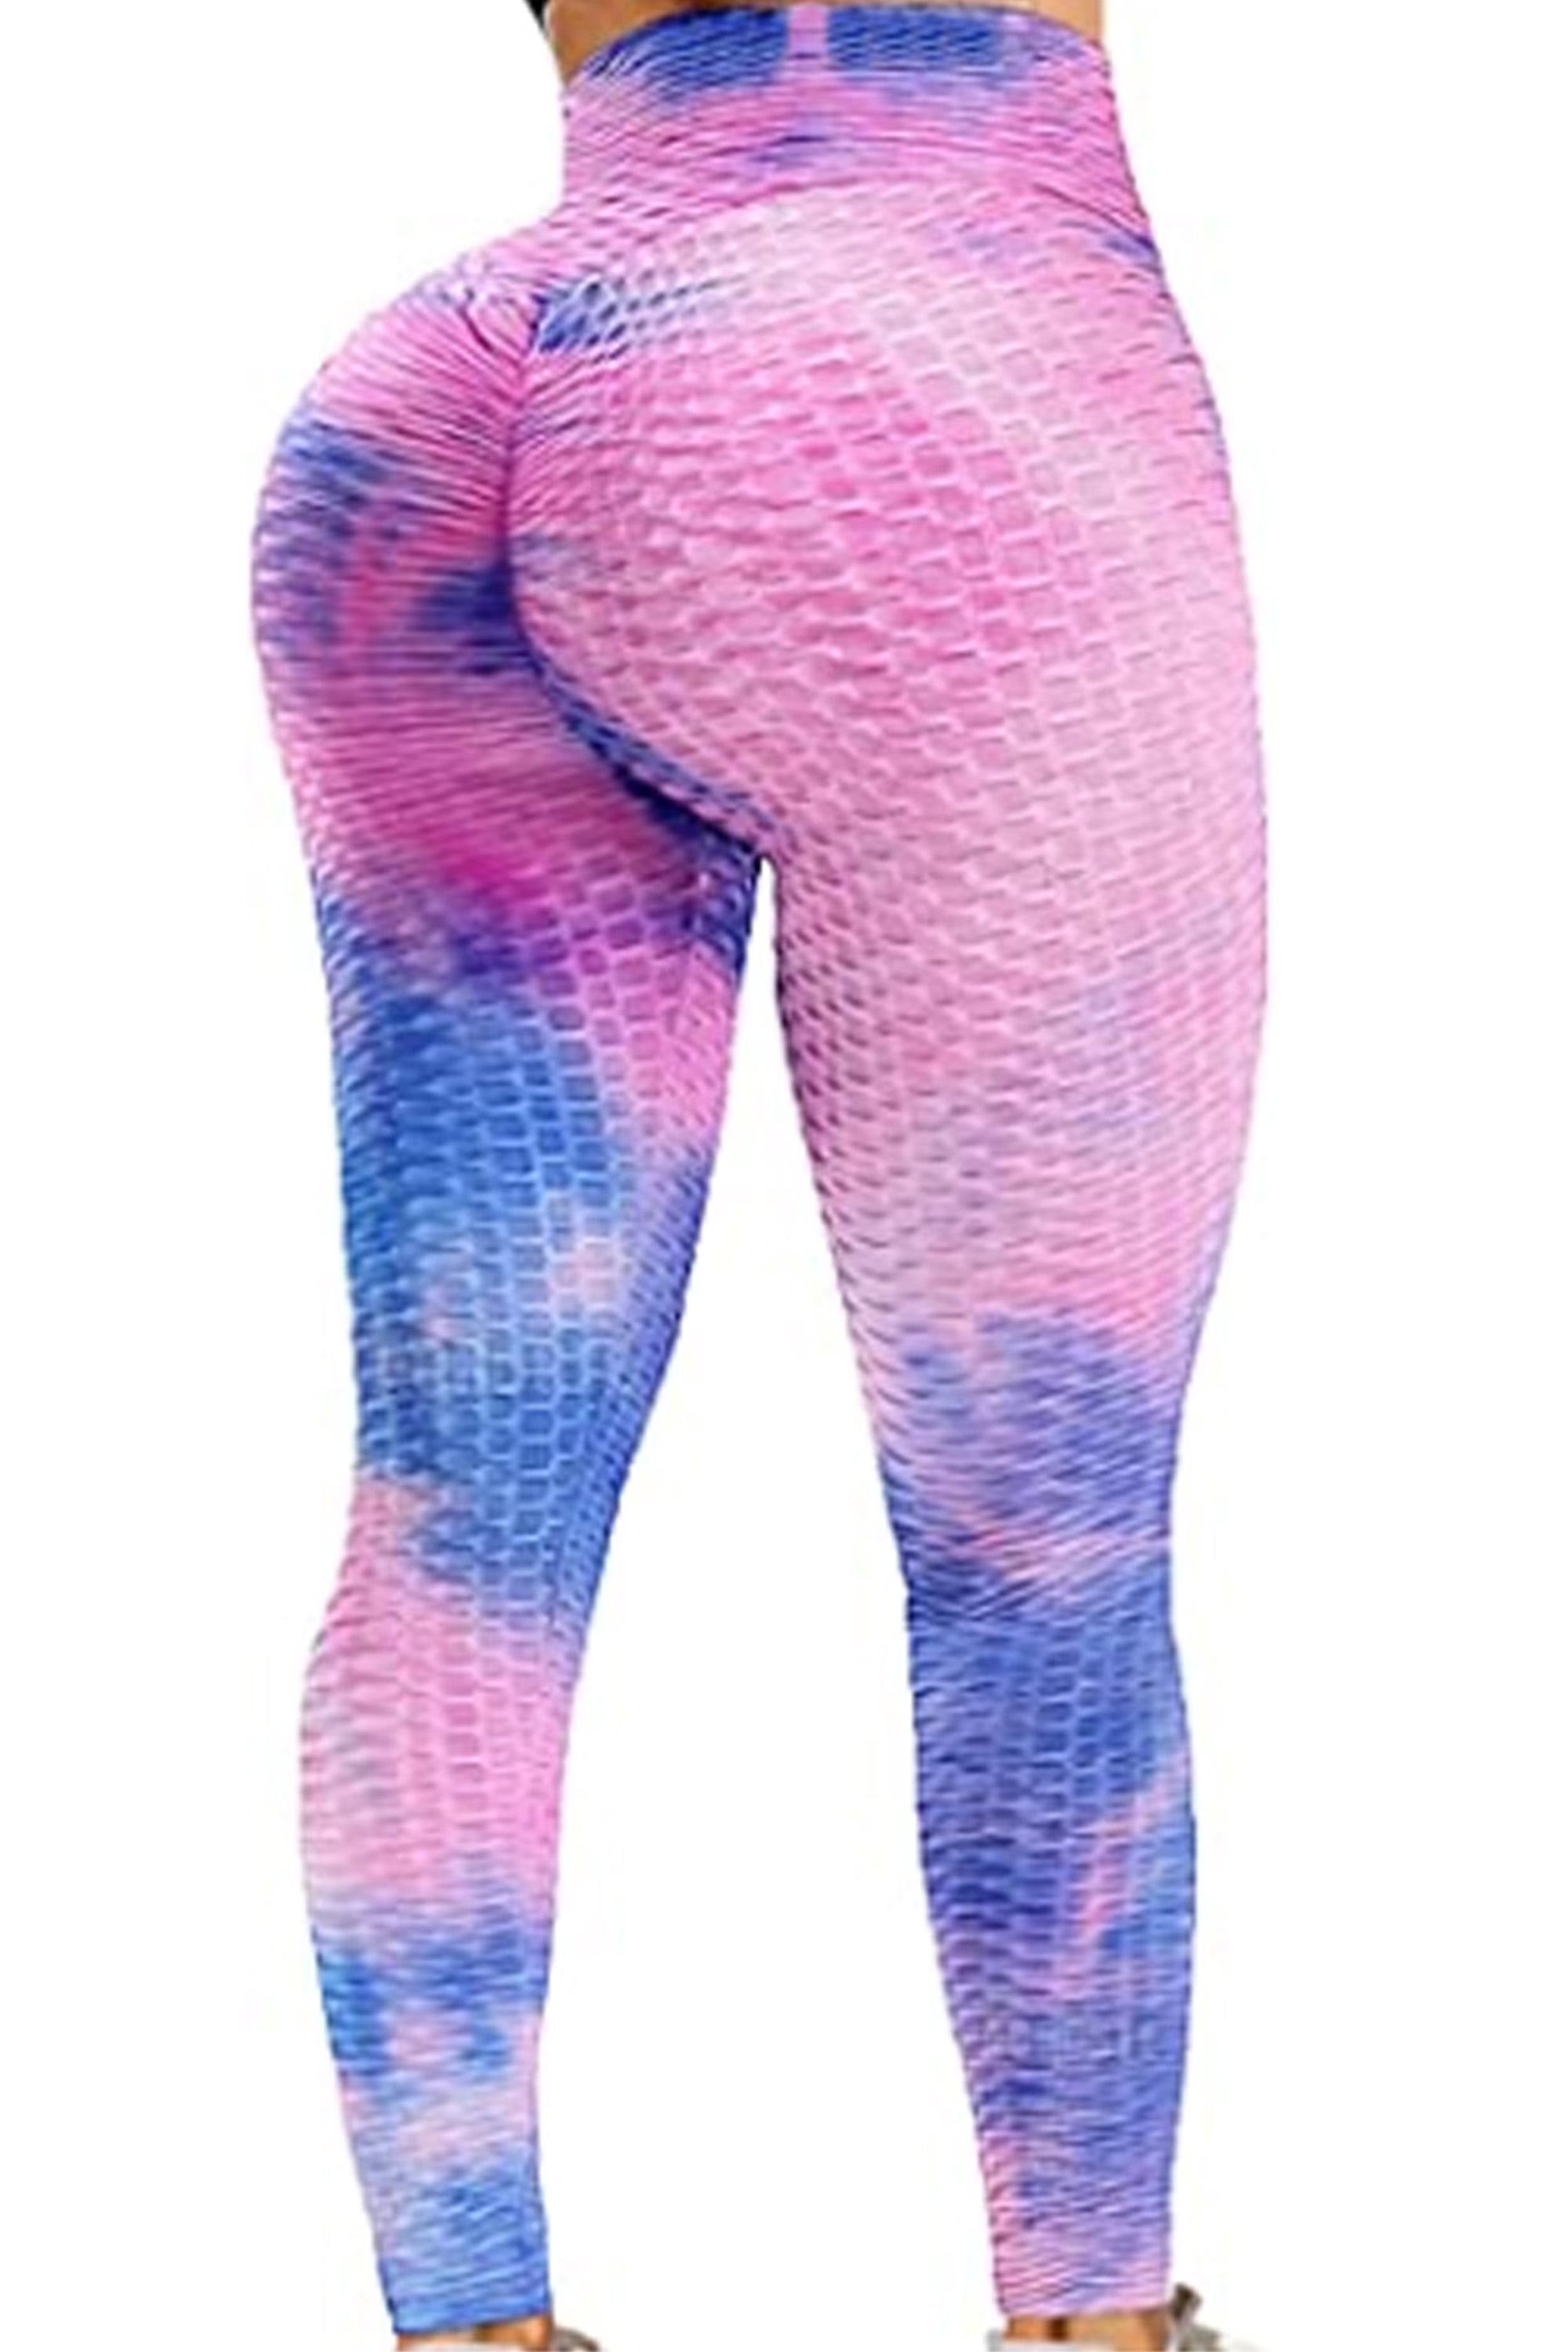 High Quality Mermaid Curve Yoga  Leggings Tiktok With Back Bandage  For Women Elastic Tight Fit For Running, Gym, Fitness, And Dance H1221 From  Mengyang10, $22.15